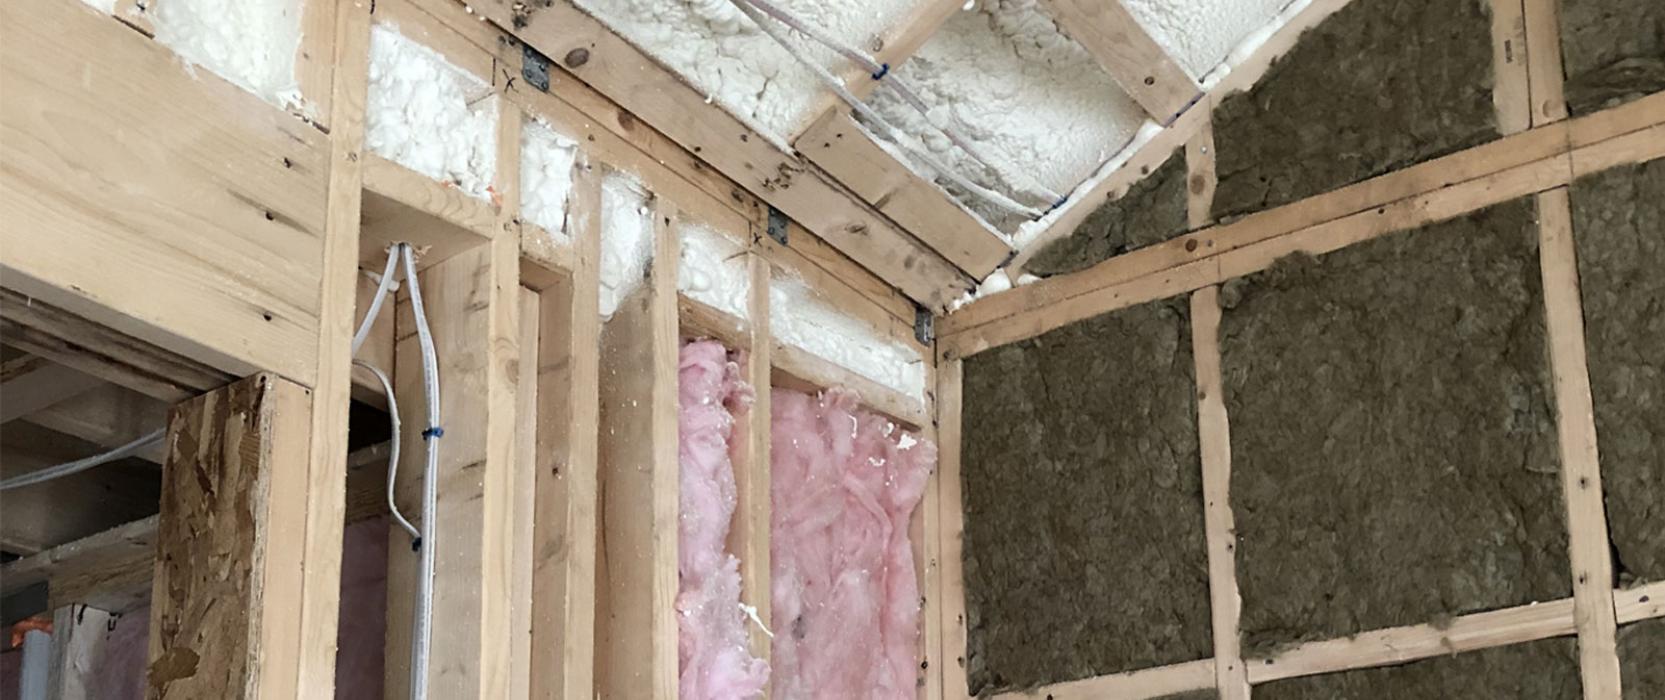 Closed cell insulation by Anderson Insulation